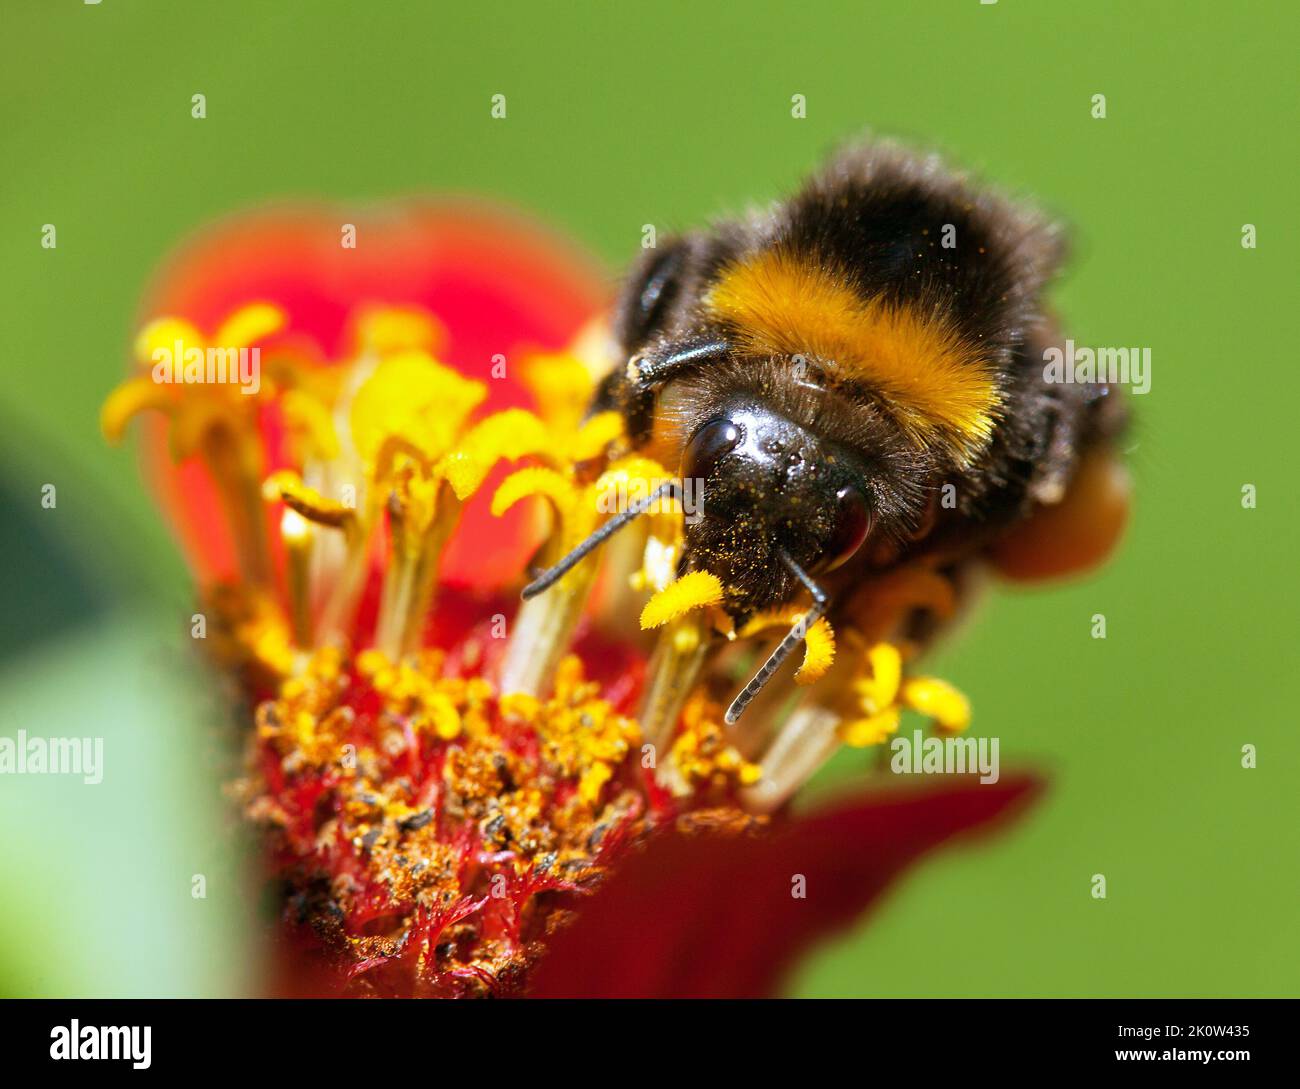 detail of bumblebee or bumble bee pollinated of yellow and red flower Stock Photo